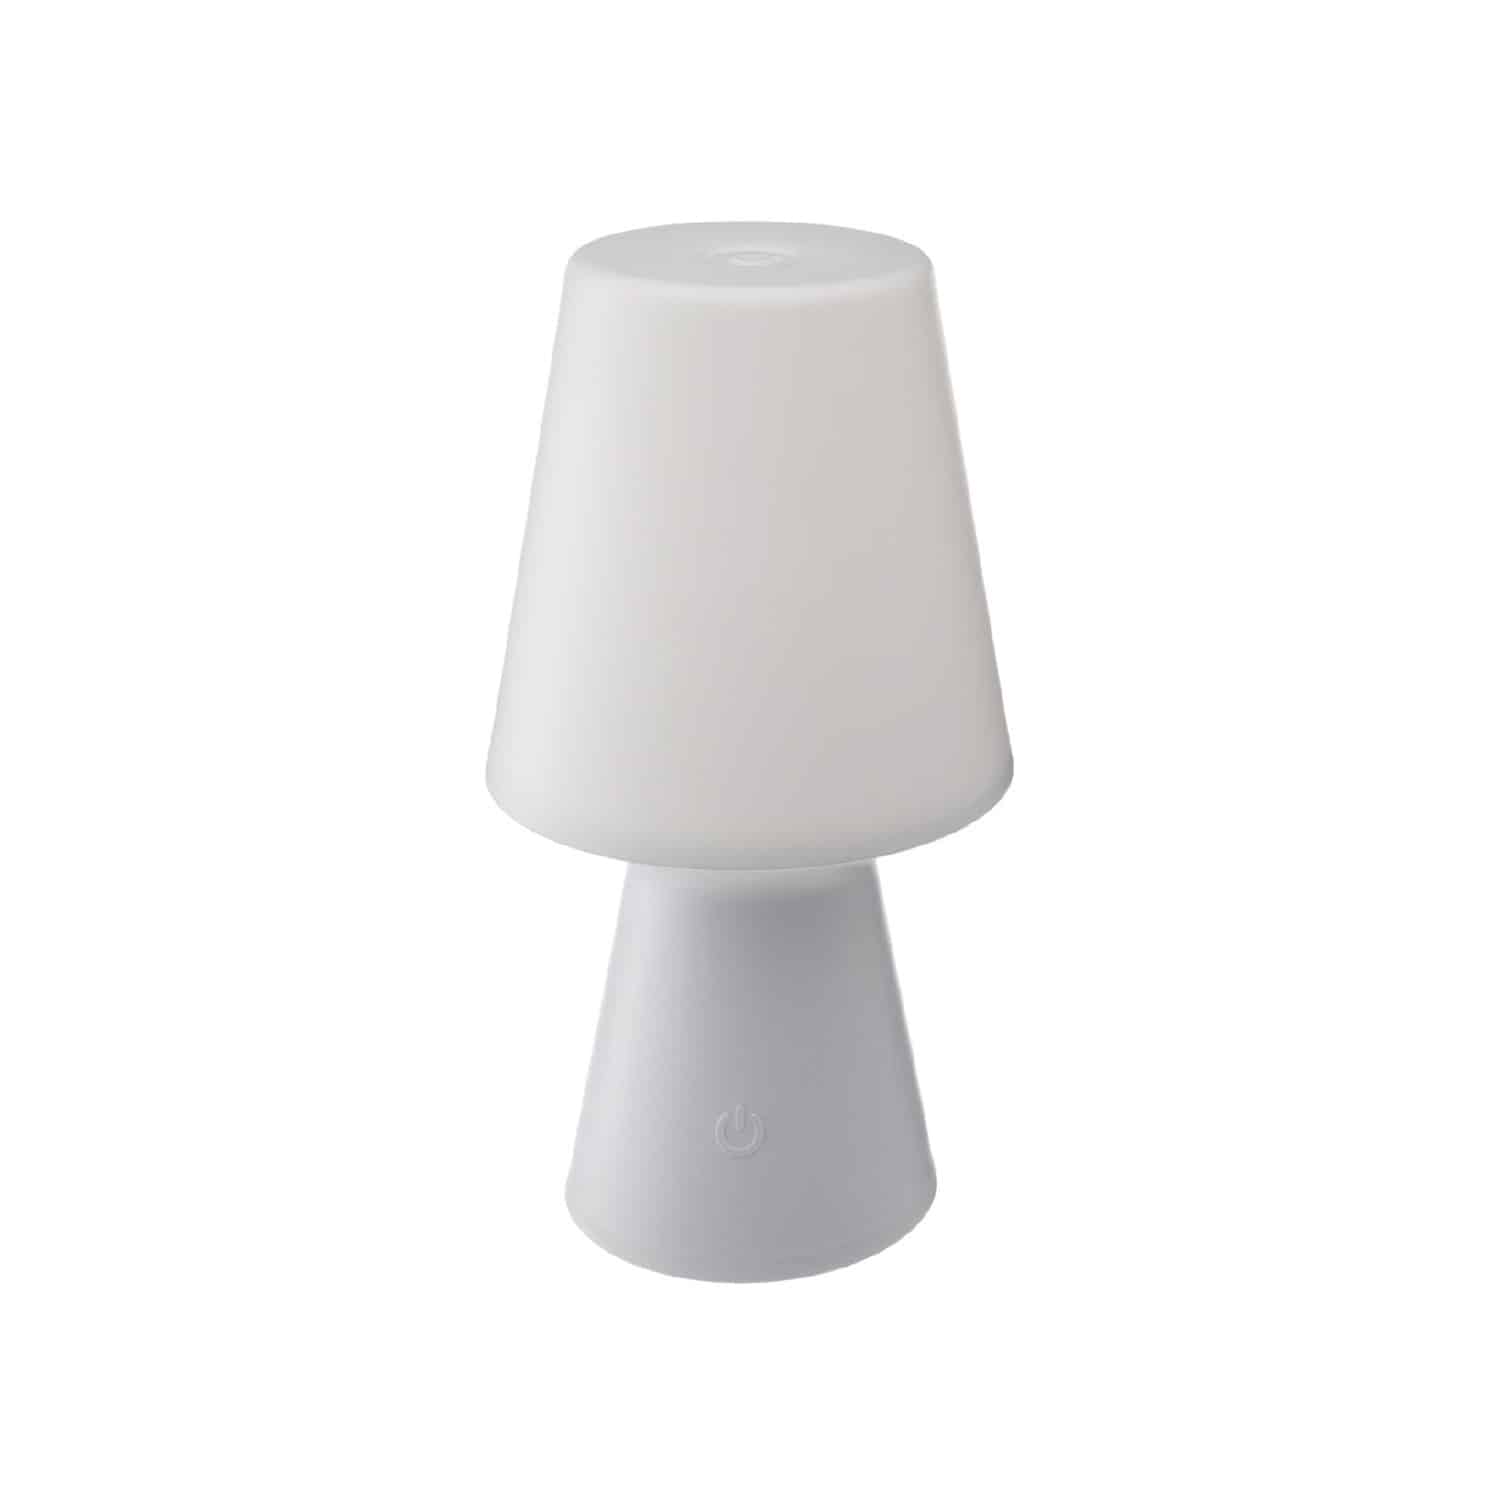 Lampe 3 Lux LED blanches BERNER